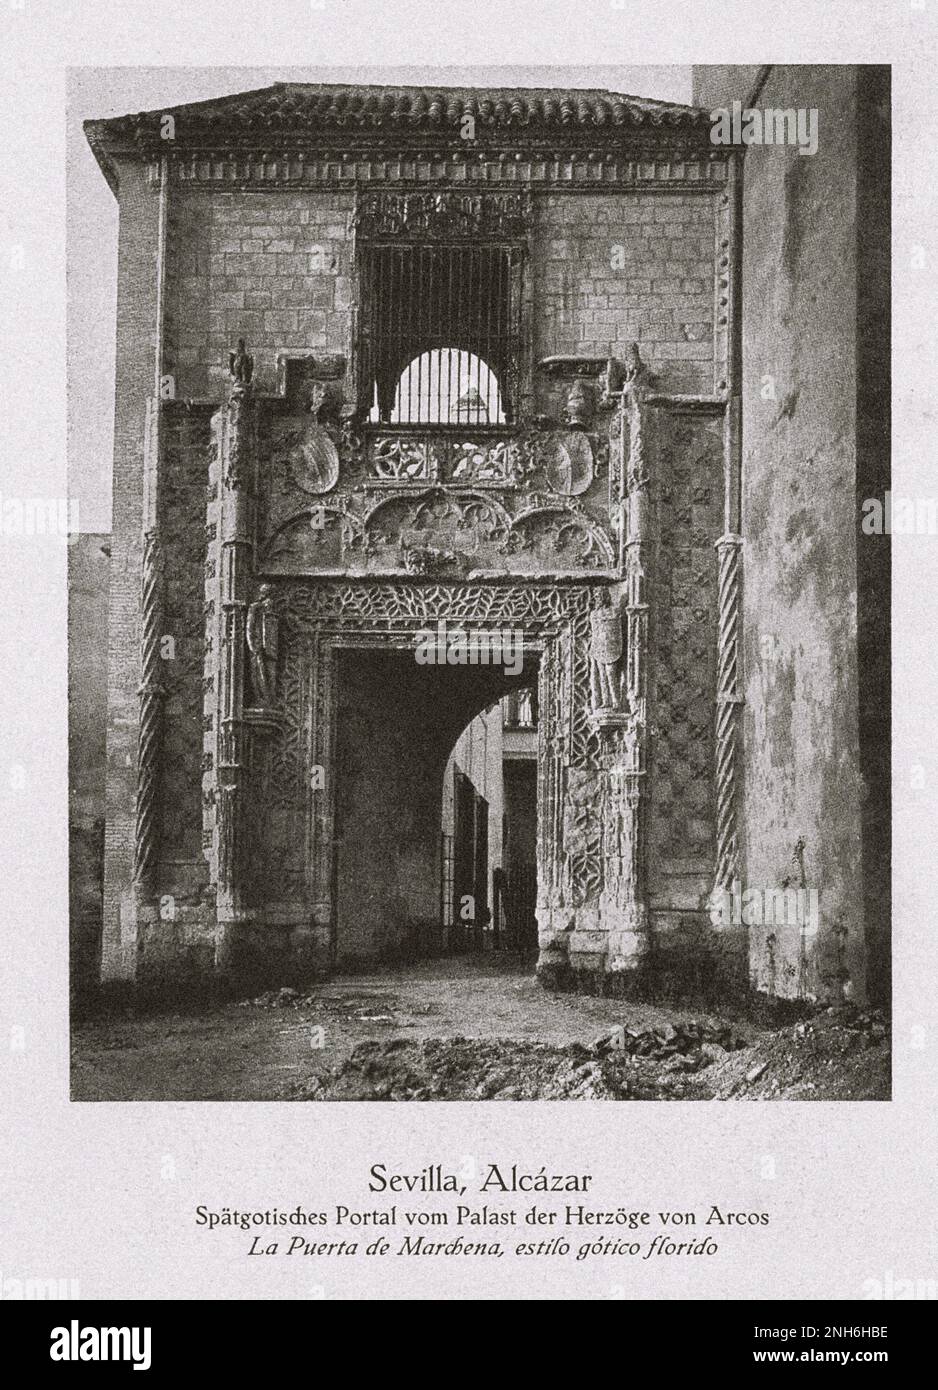 Architecture of Old Spain. Vintage photo of the Royal Alcázars of Seville. Late Gothic portal of the Palace of the Dukes of Arcos. The Royal Alcázars of Seville (Spanish: Reales Alcázares de Sevilla), historically known as al-Qasr al-Muriq and commonly known as the Alcázar of Seville, is a royal palace in Seville, Spain, built for the Christian king Peter of Castile. It was built by Castilian Christians on the site of an Abbadid Muslim alcazar, or residential fortress. Stock Photo